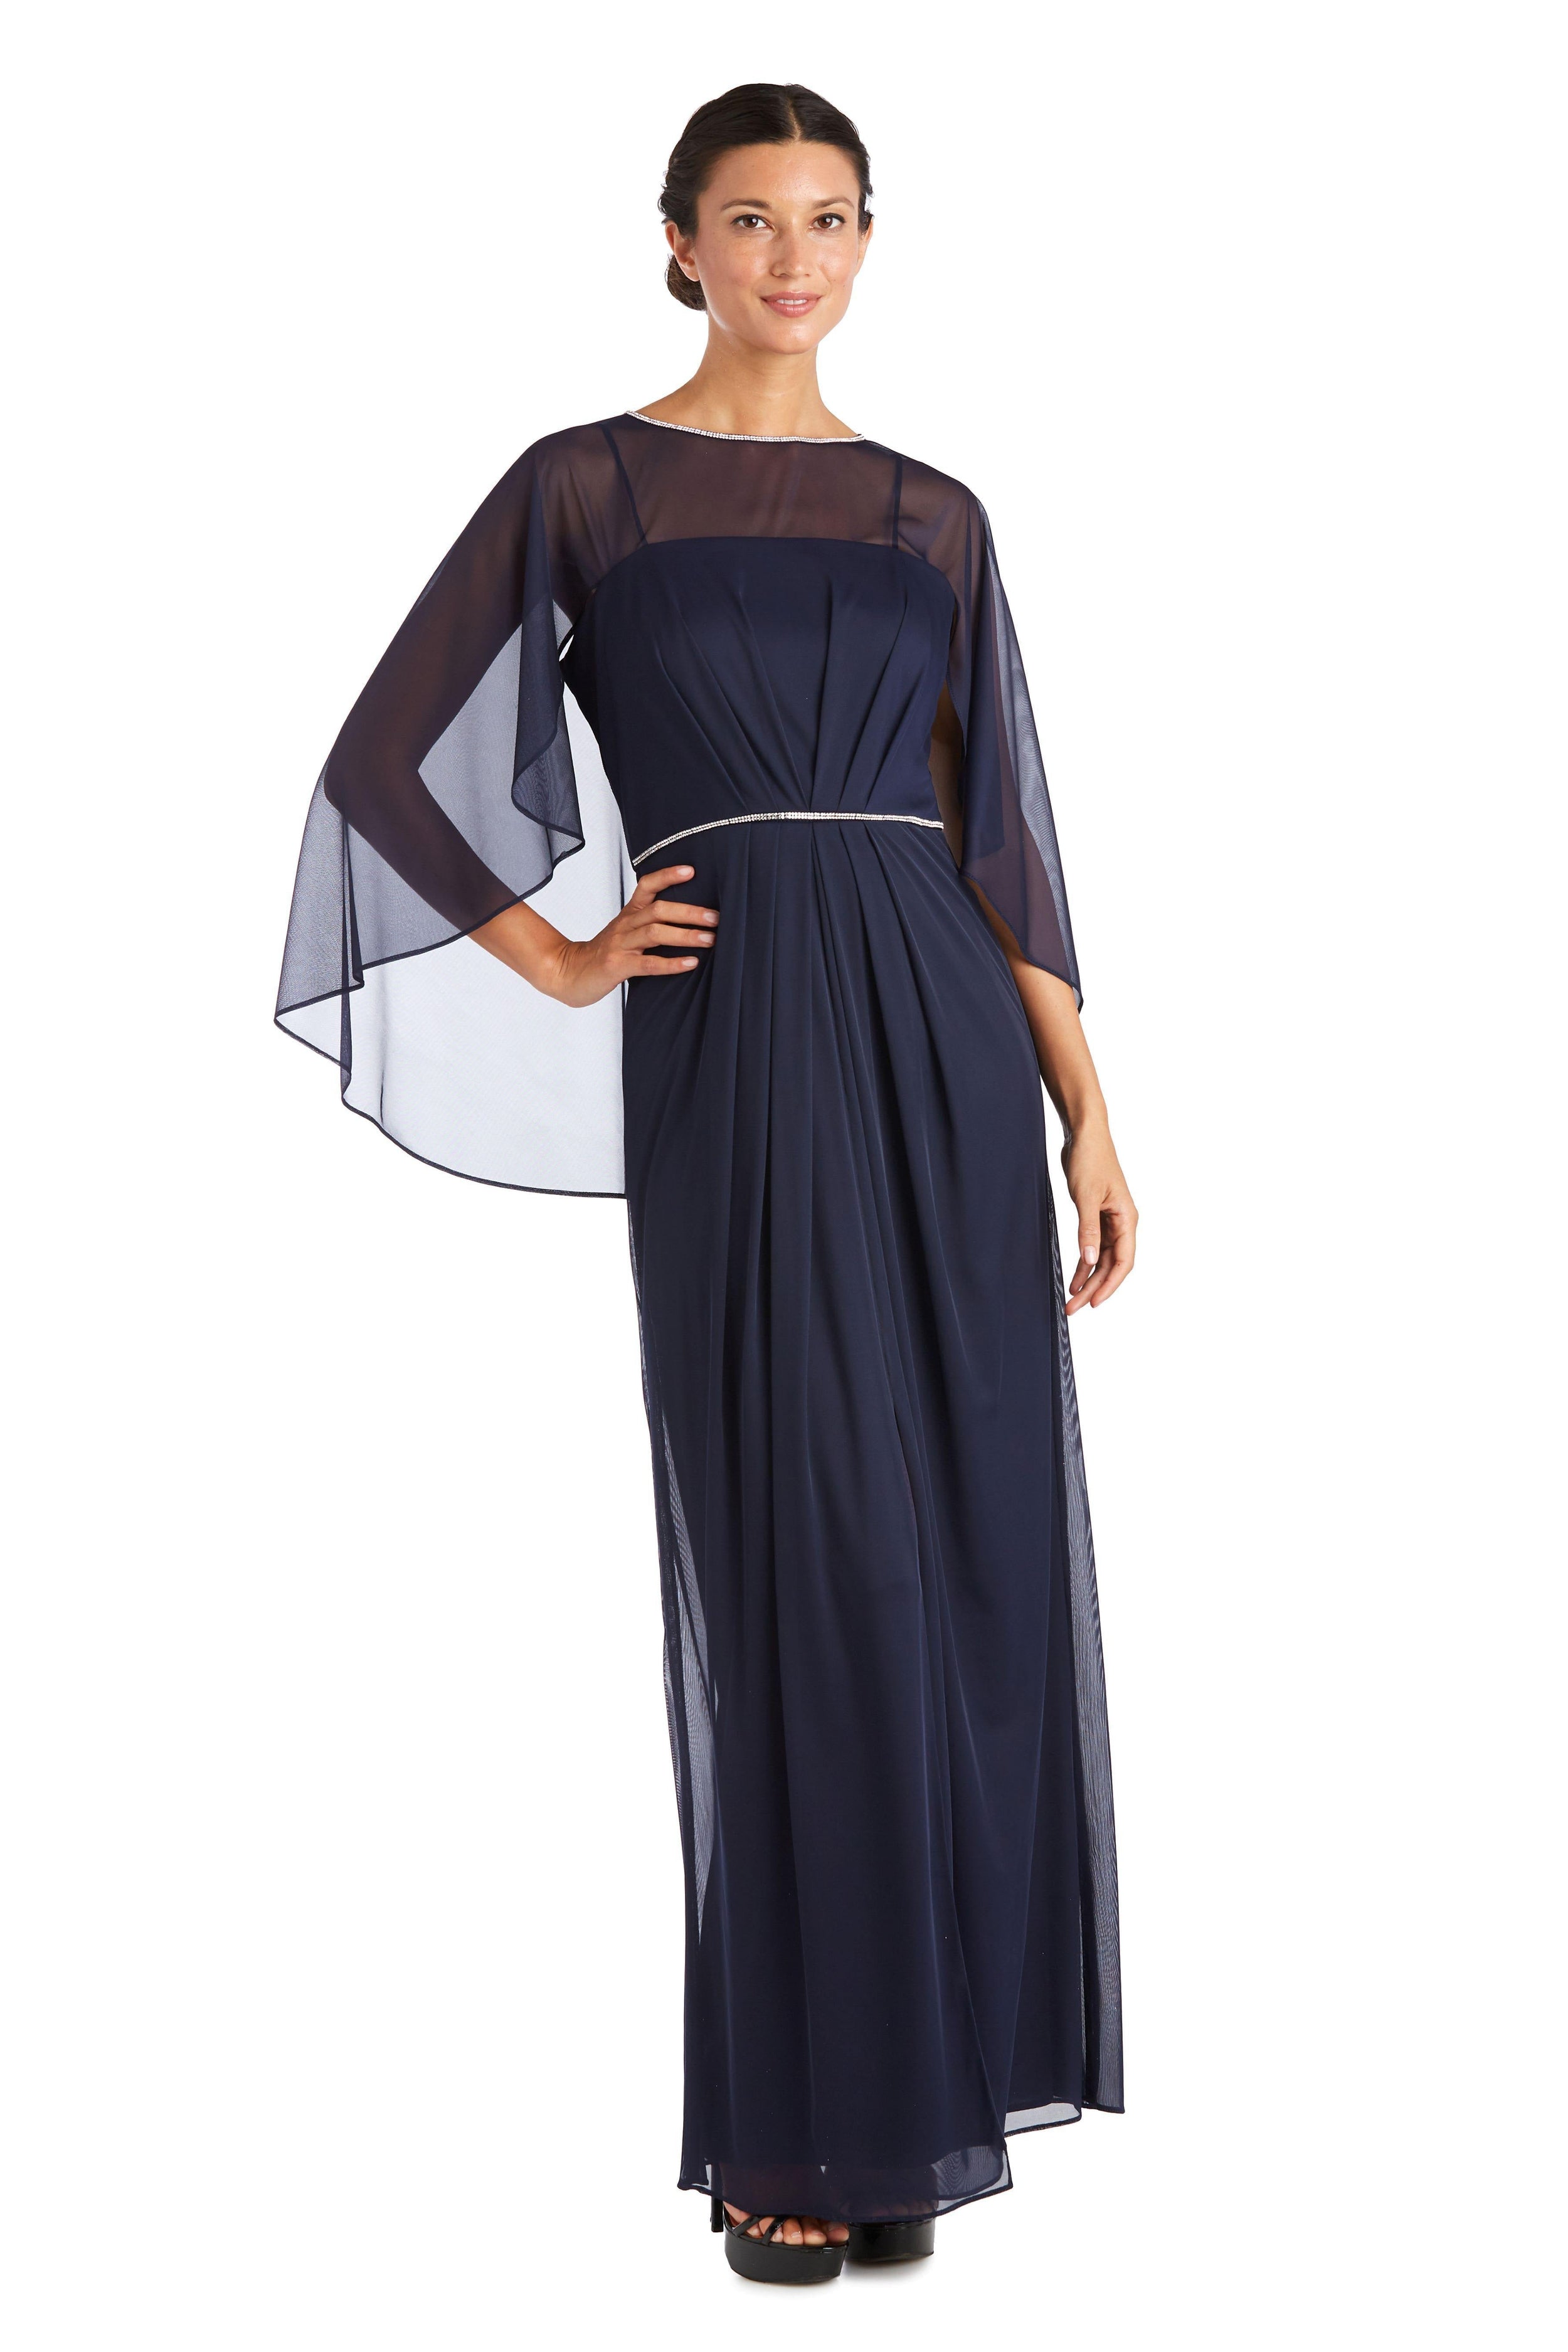 R&M Richards Long Mother of Bride Chiffon Gown 2461 - The Dress Outlet